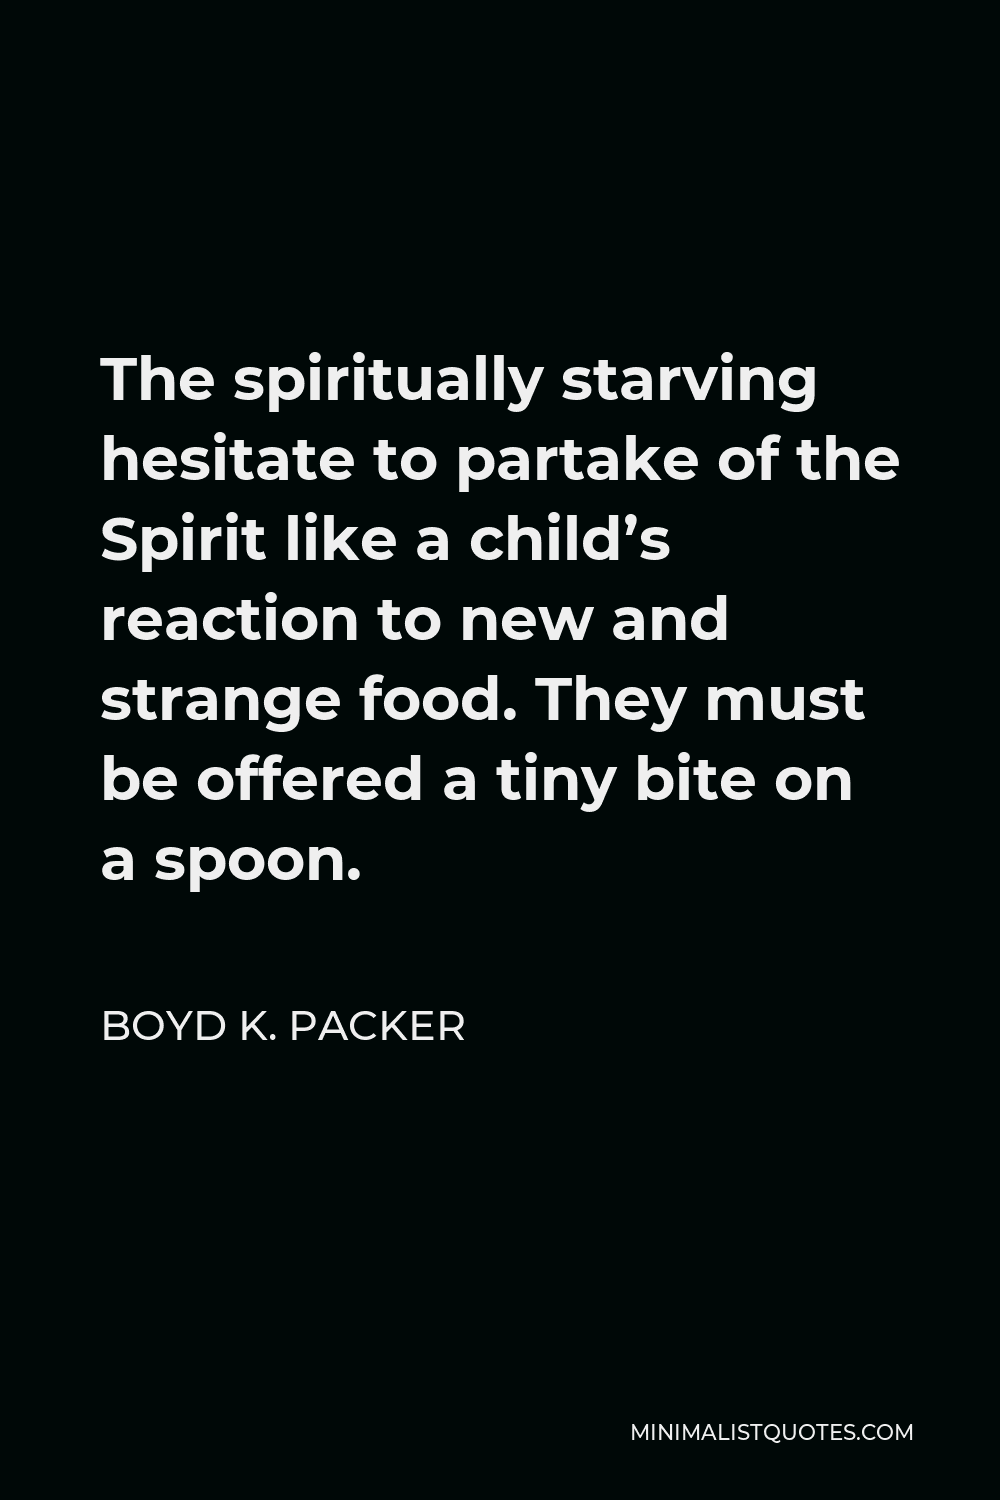 Boyd K. Packer Quote - The spiritually starving hesitate to partake of the Spirit like a child’s reaction to new and strange food. They must be offered a tiny bite on a spoon.